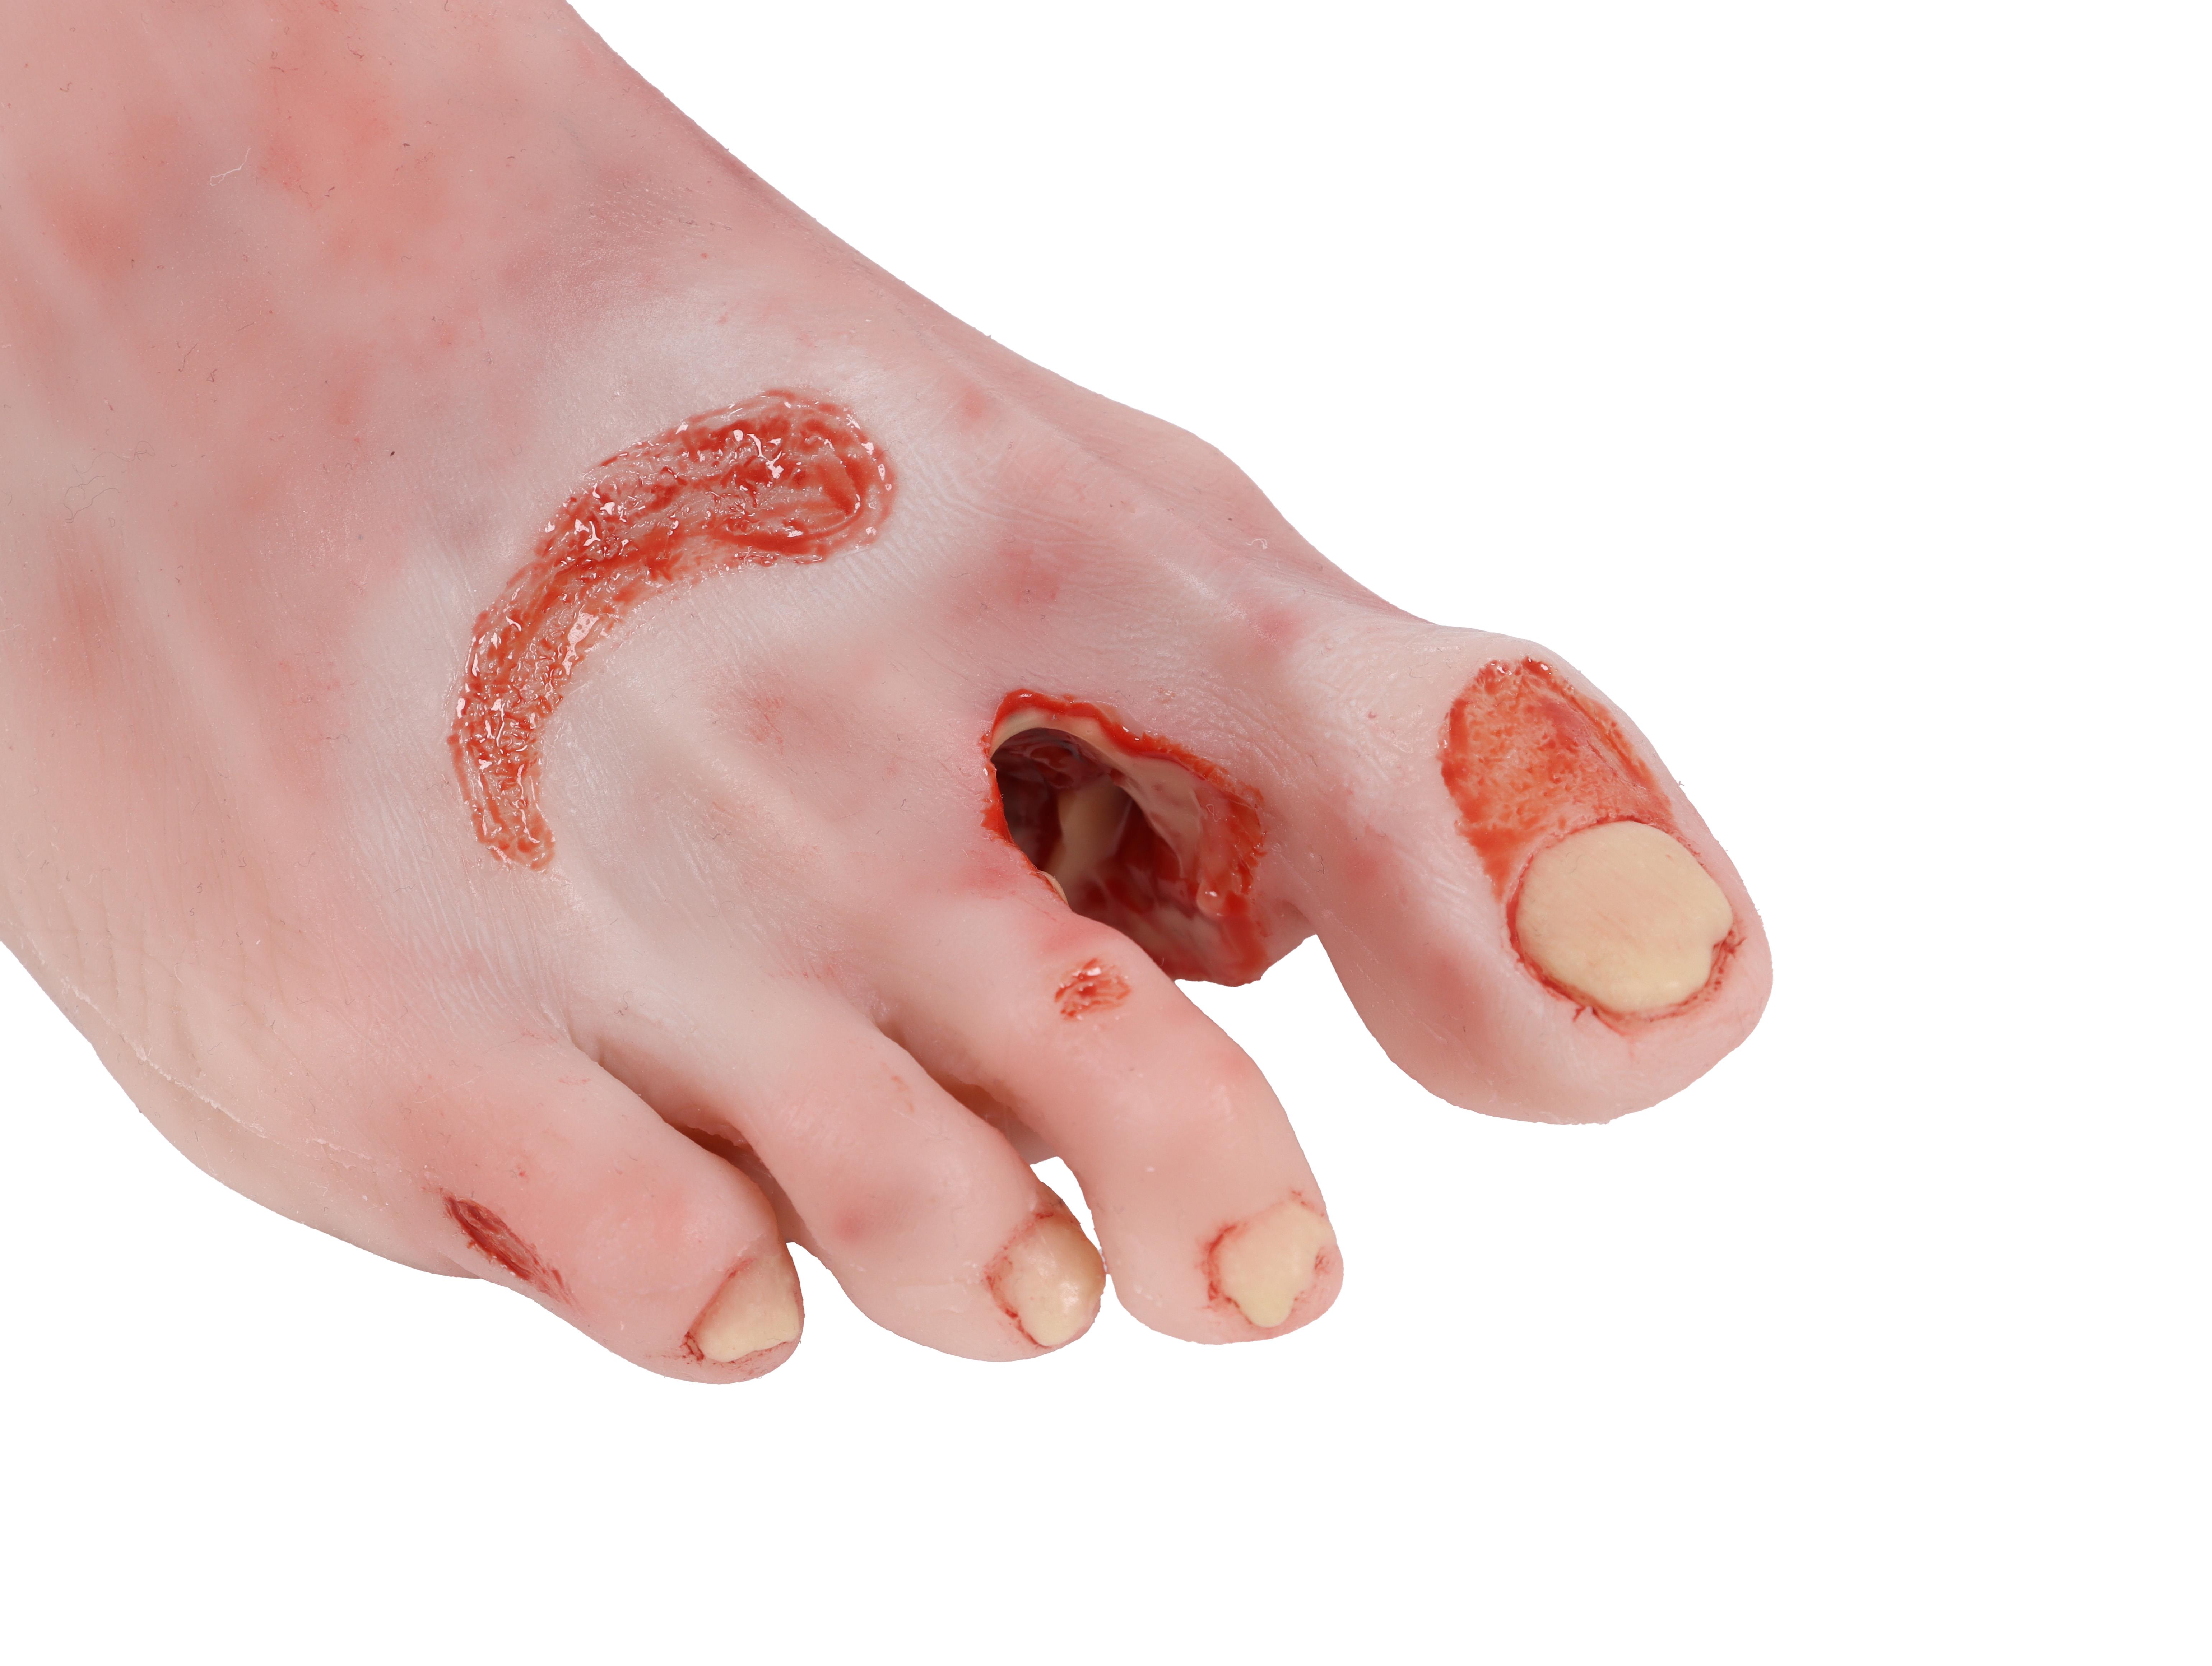 Wound-foot-with-diabetic-foot-syndrome-severe-stage-4